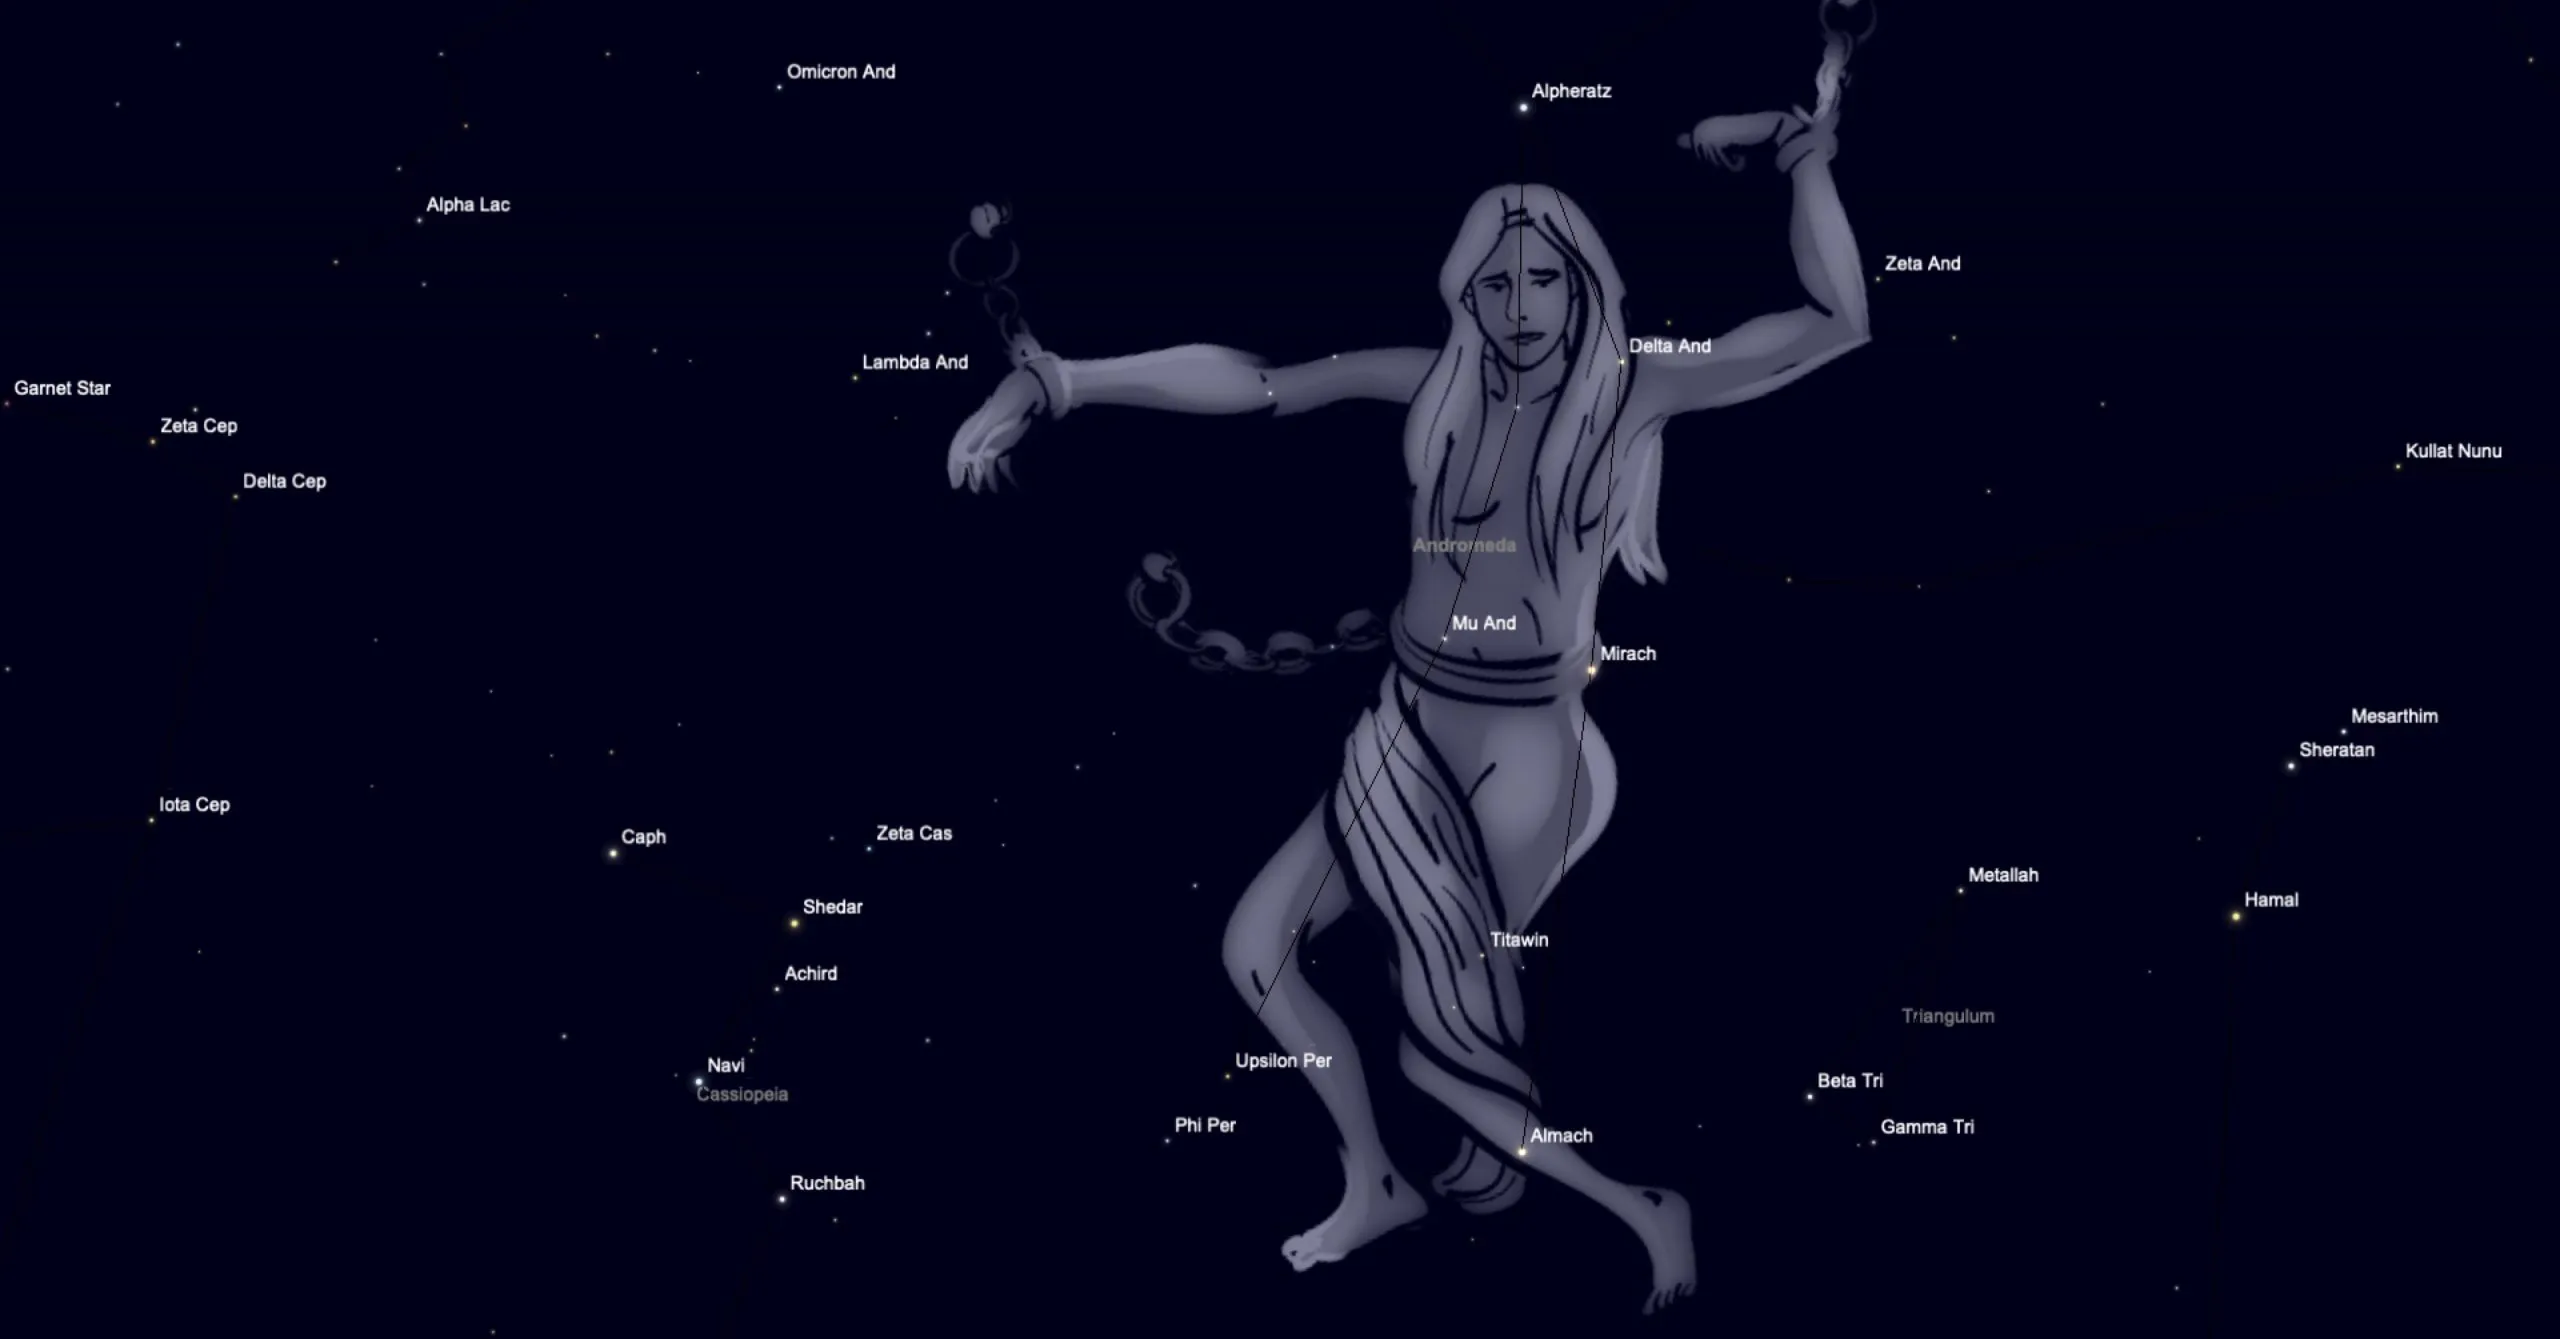 Andromeda Constellation – The Astronomer’s Guide to the Chained Princess